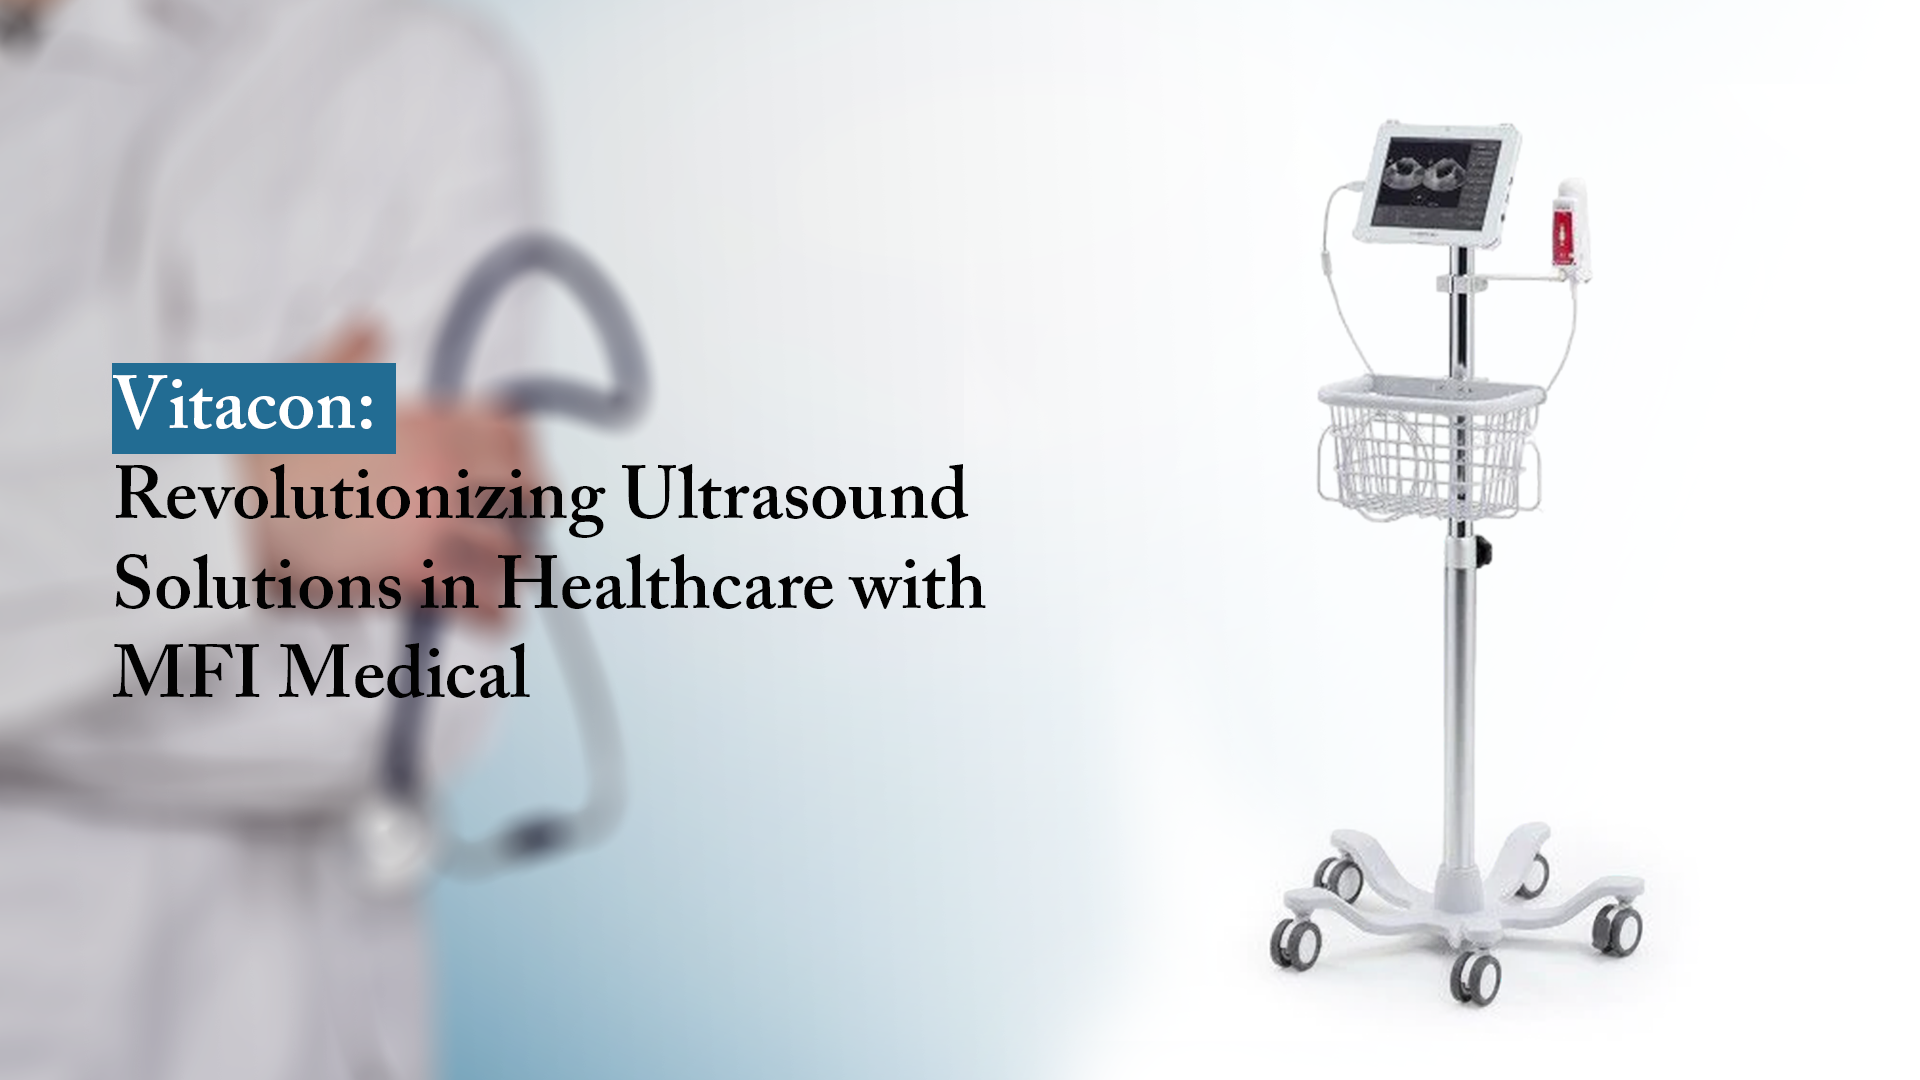 Vitacon: Revolutionizing Ultrasound Solutions in Healthcare with MFI Medical